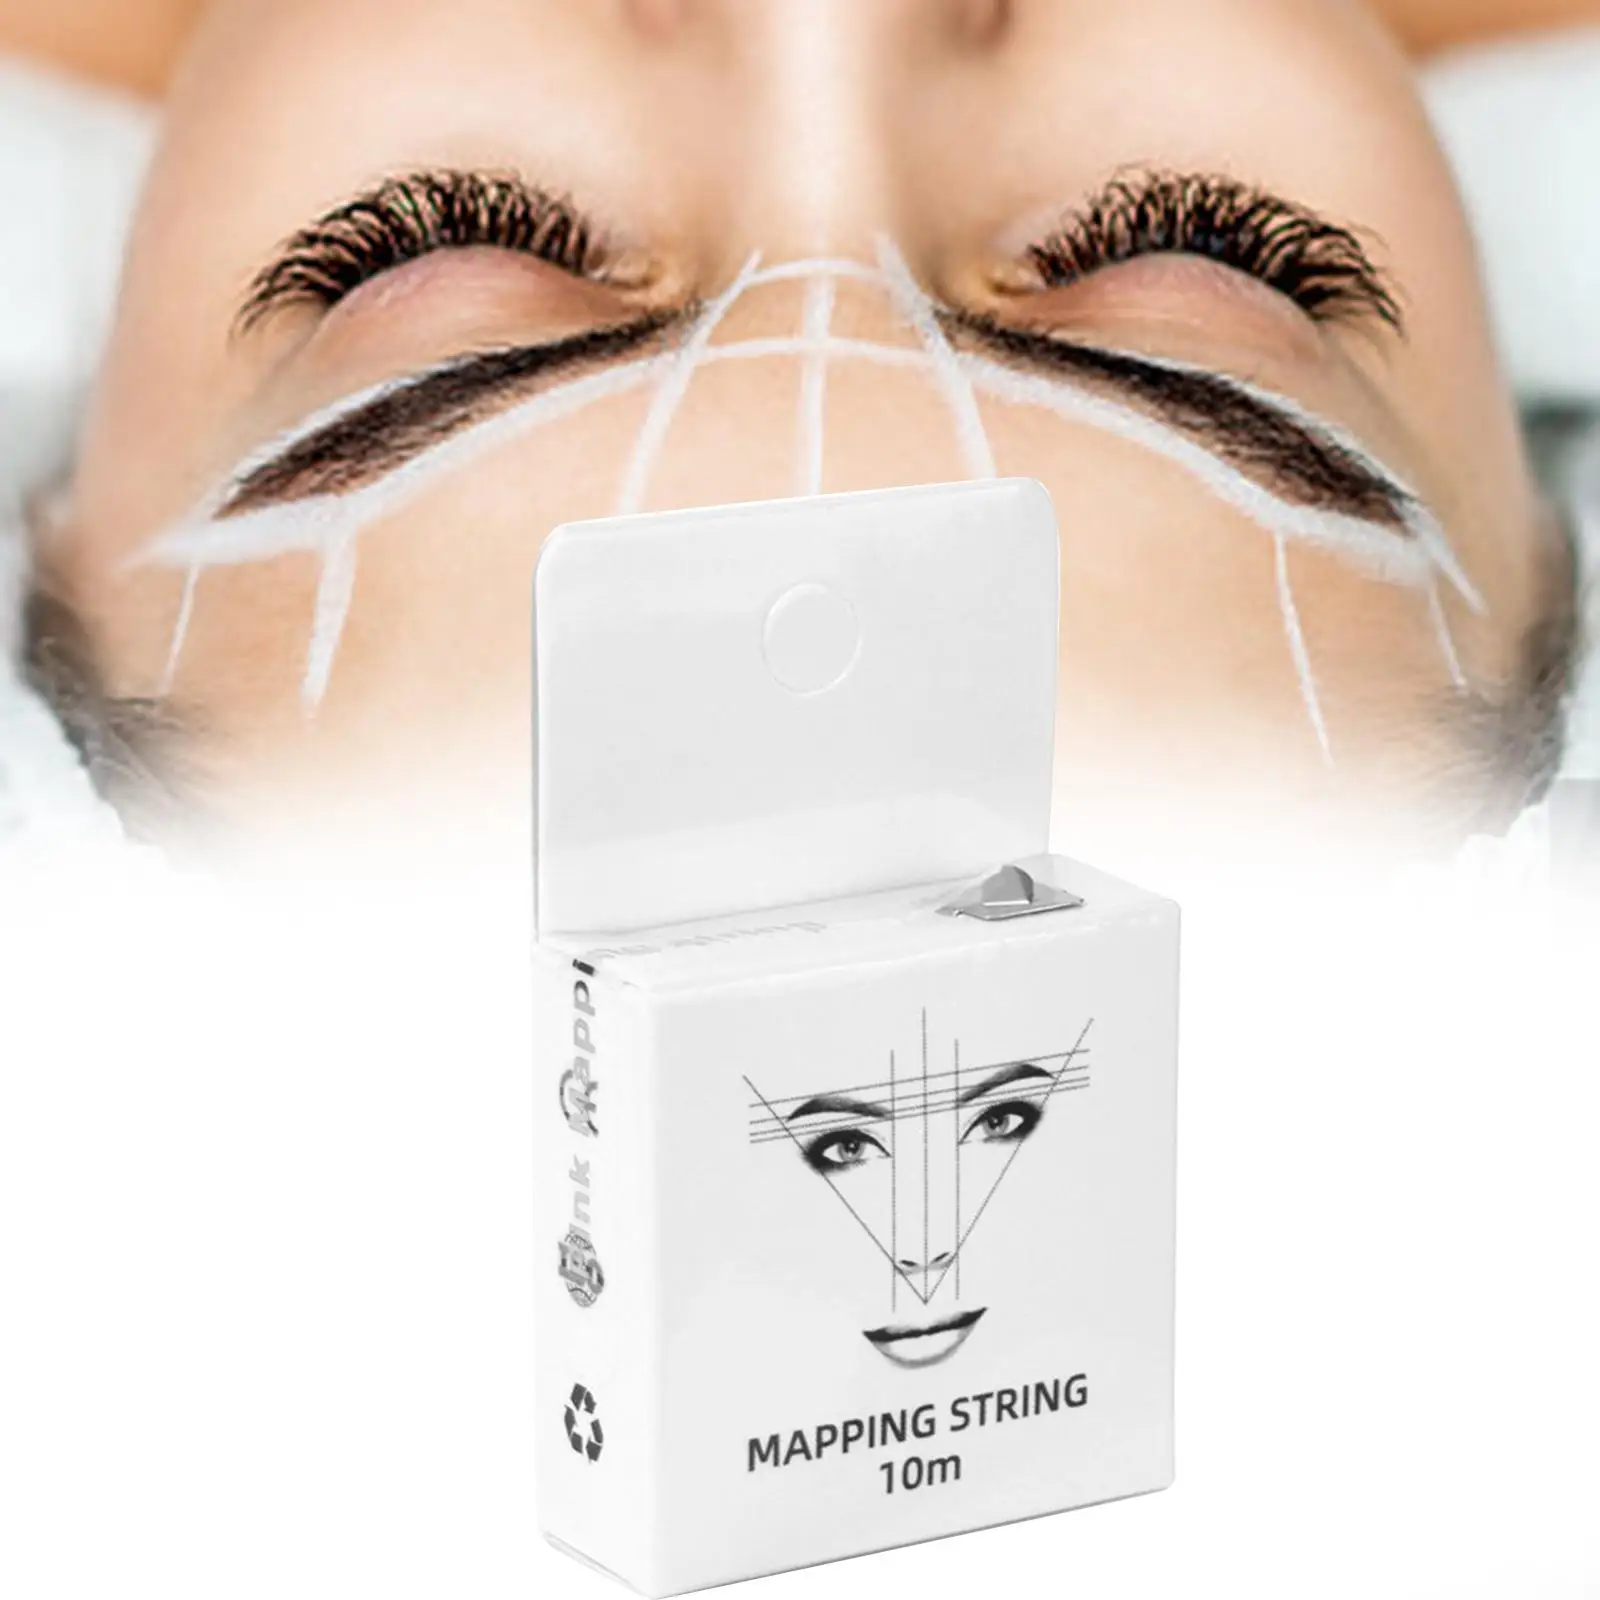 White Eyebrow Mapping String Positioning Mapping Line Auxiliary Line Drawing with permanent Makeup Eyebrow Thread Ruler